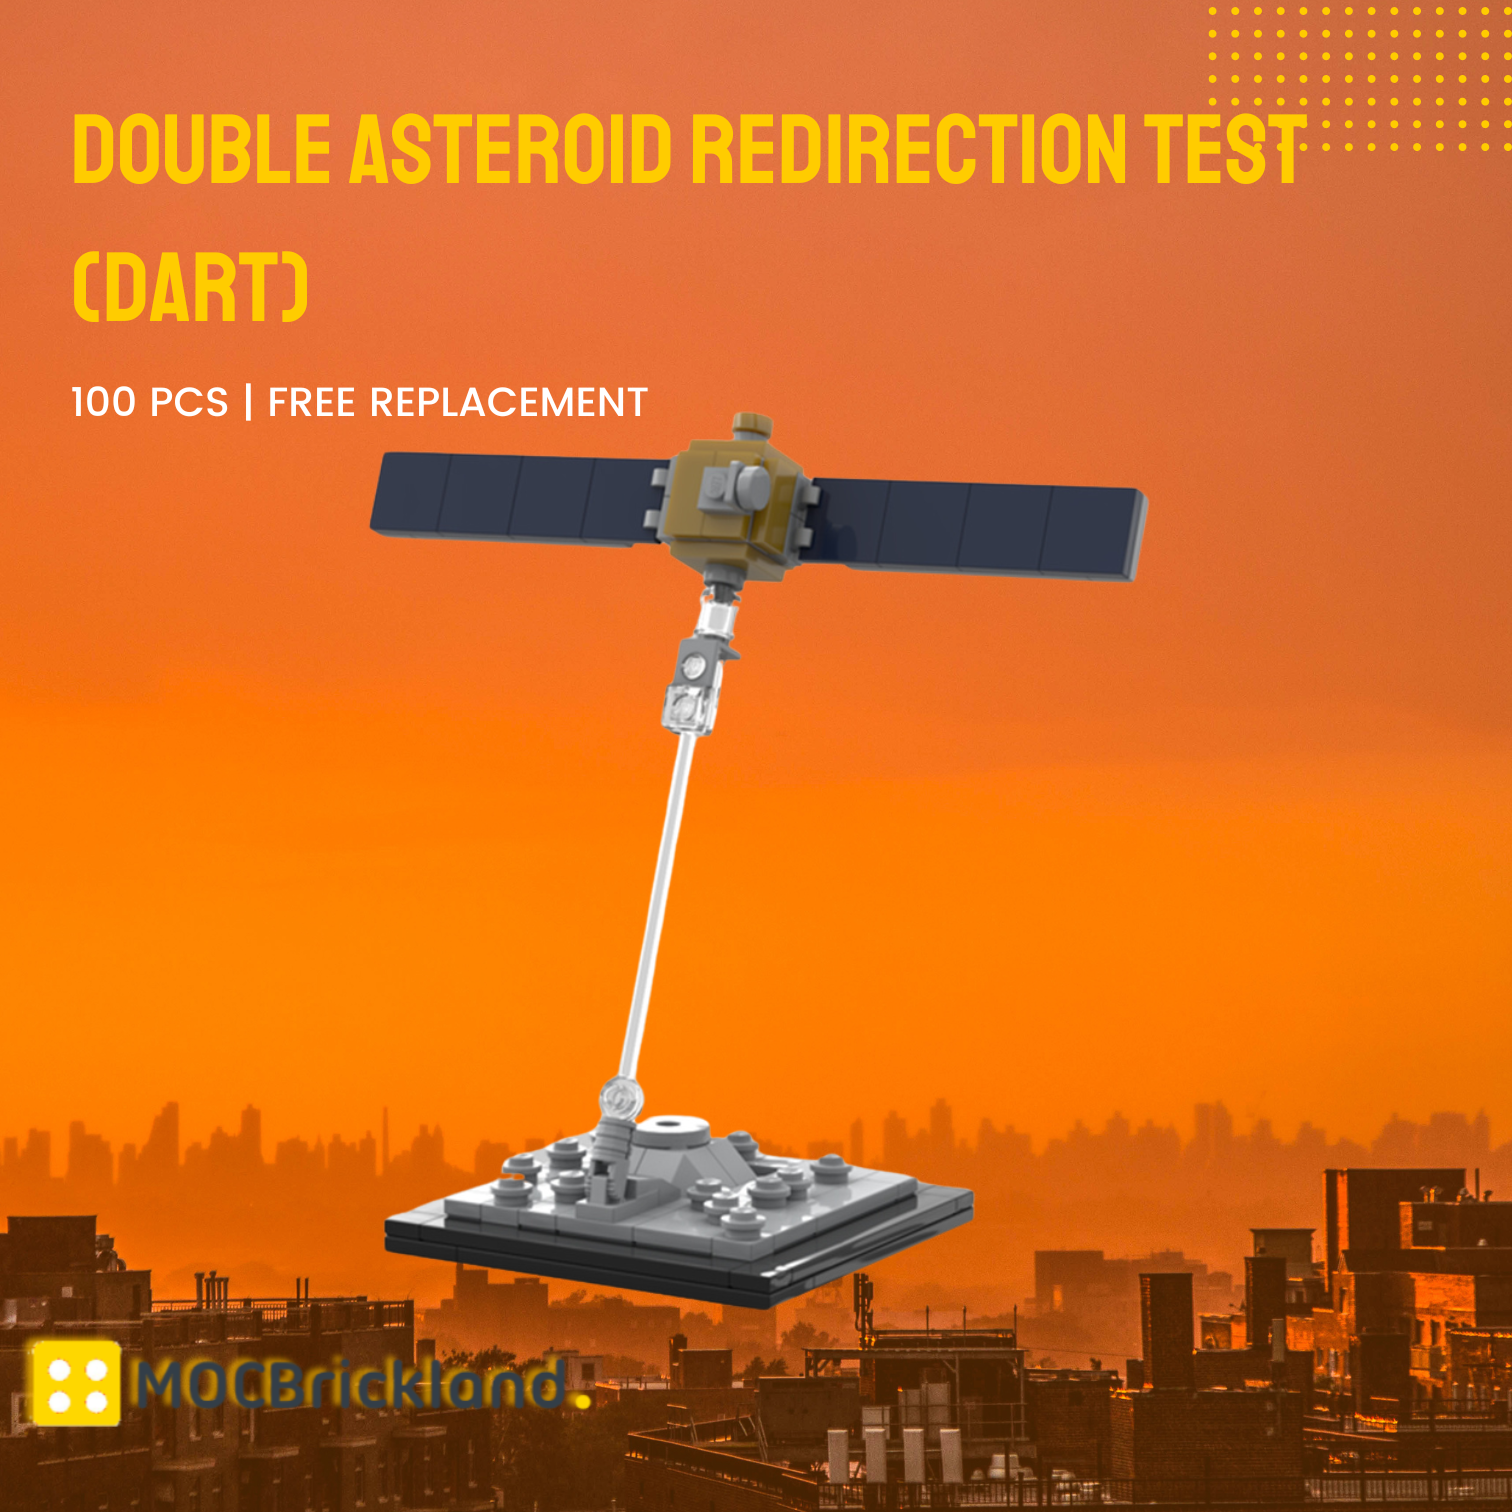 Technic MOC-89978 Double Asteroid Redirection Test (DART) MOCBRICKLAND